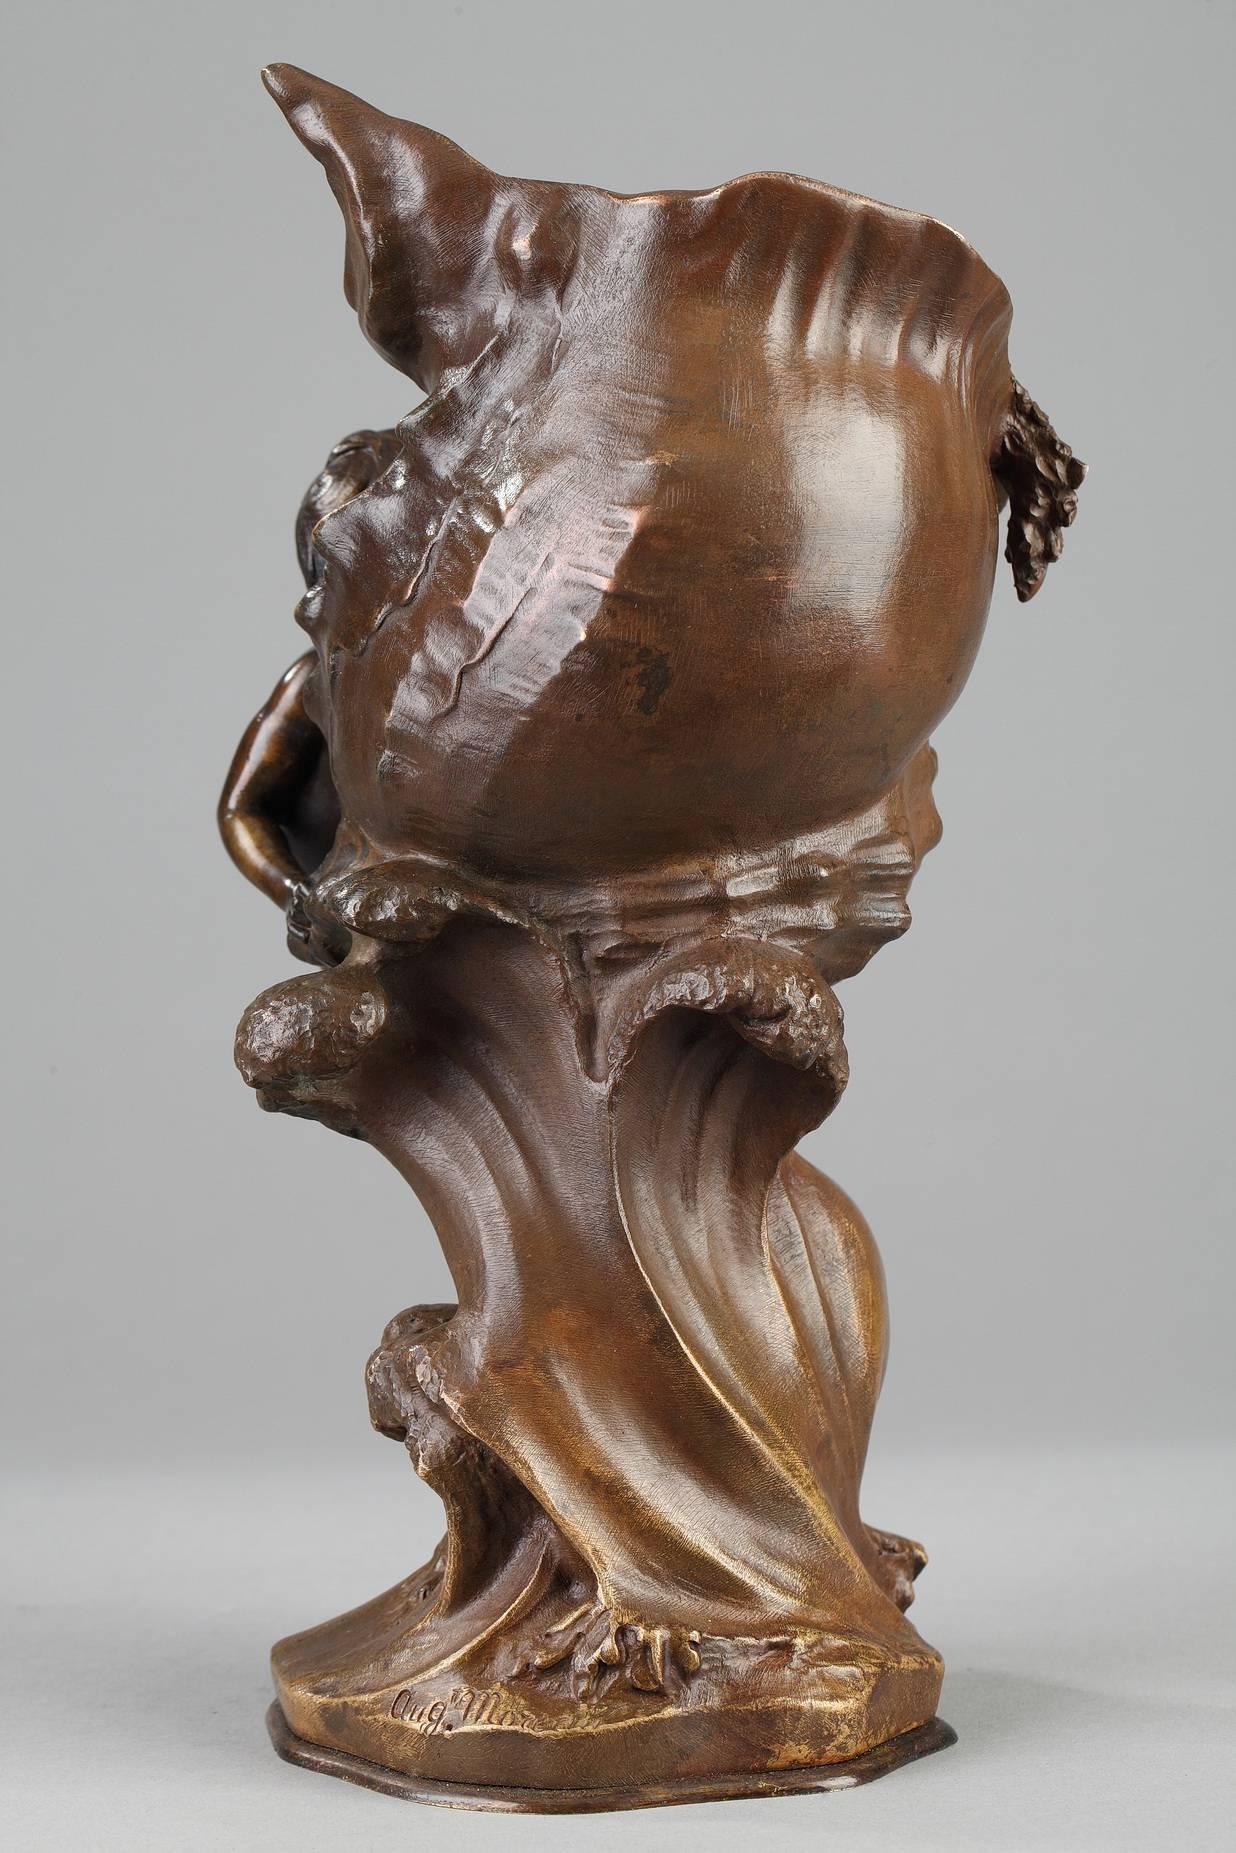 Patinated Pair of 19th Century Vases Sculpted by Auguste Moreau